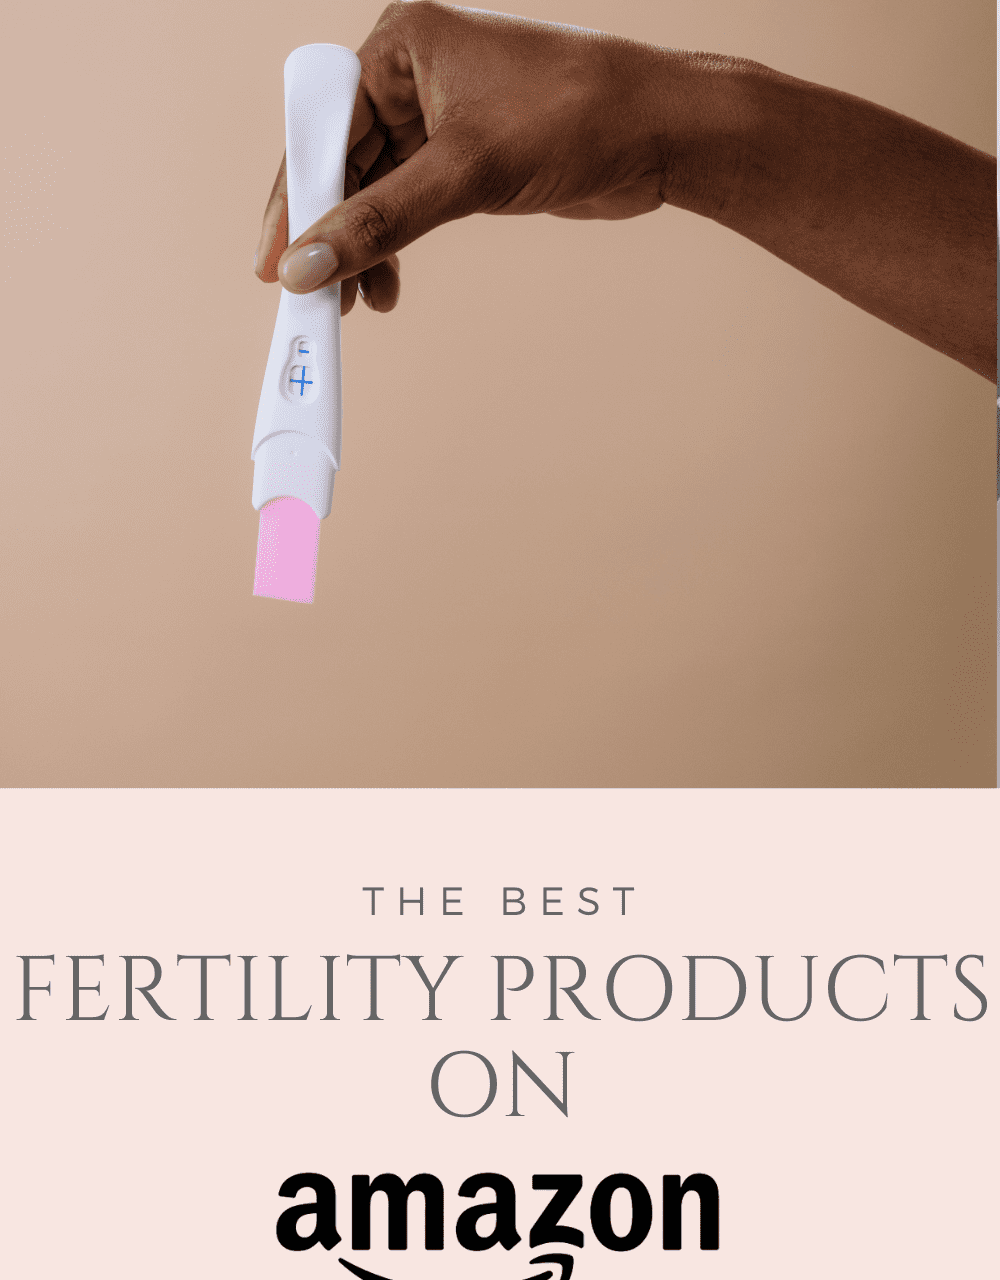 The Best Fertility Products on Amazon